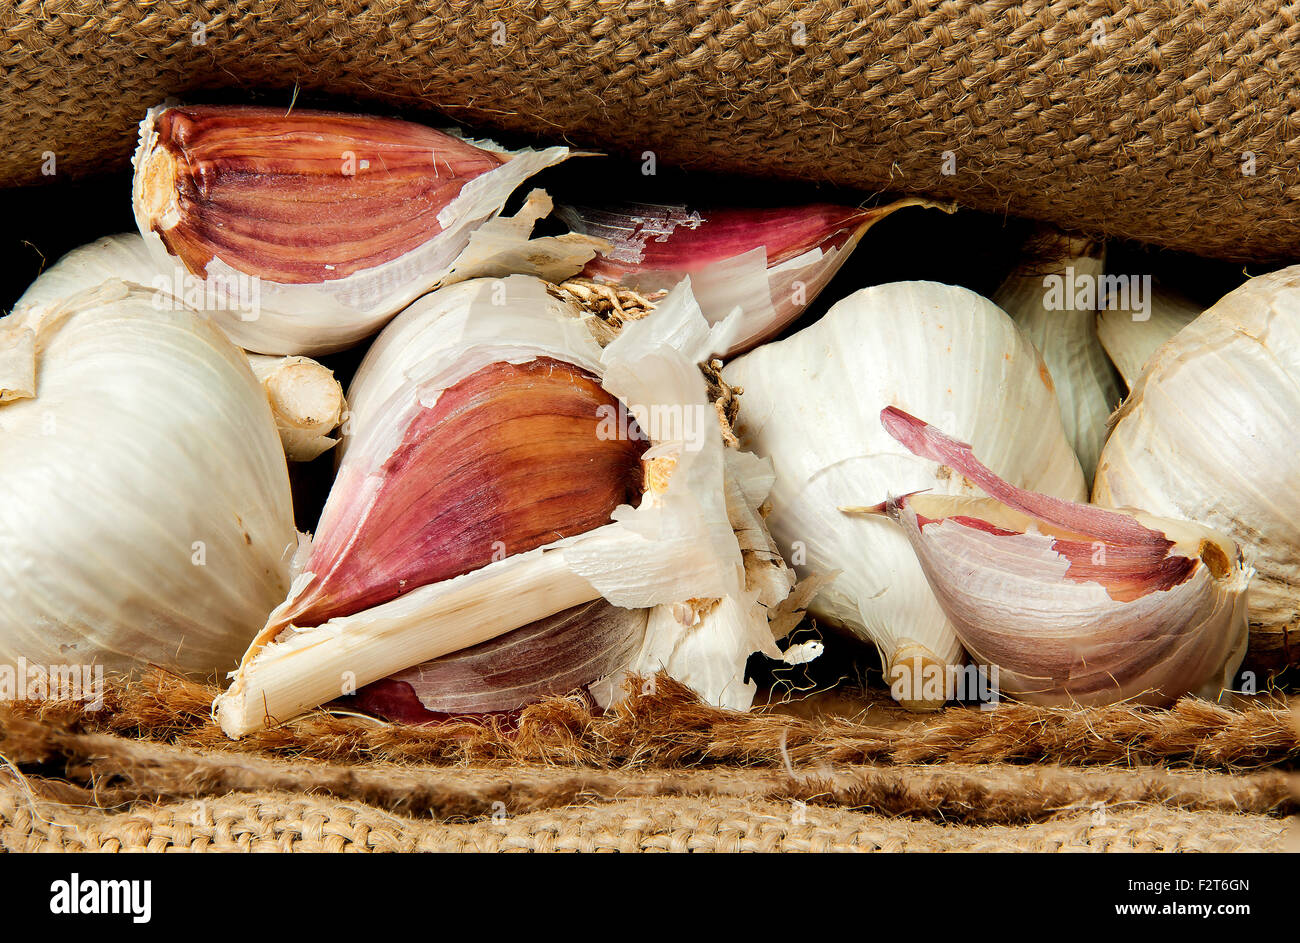 Whole garlic and cloves of garlic mixed in a sack Stock Photo